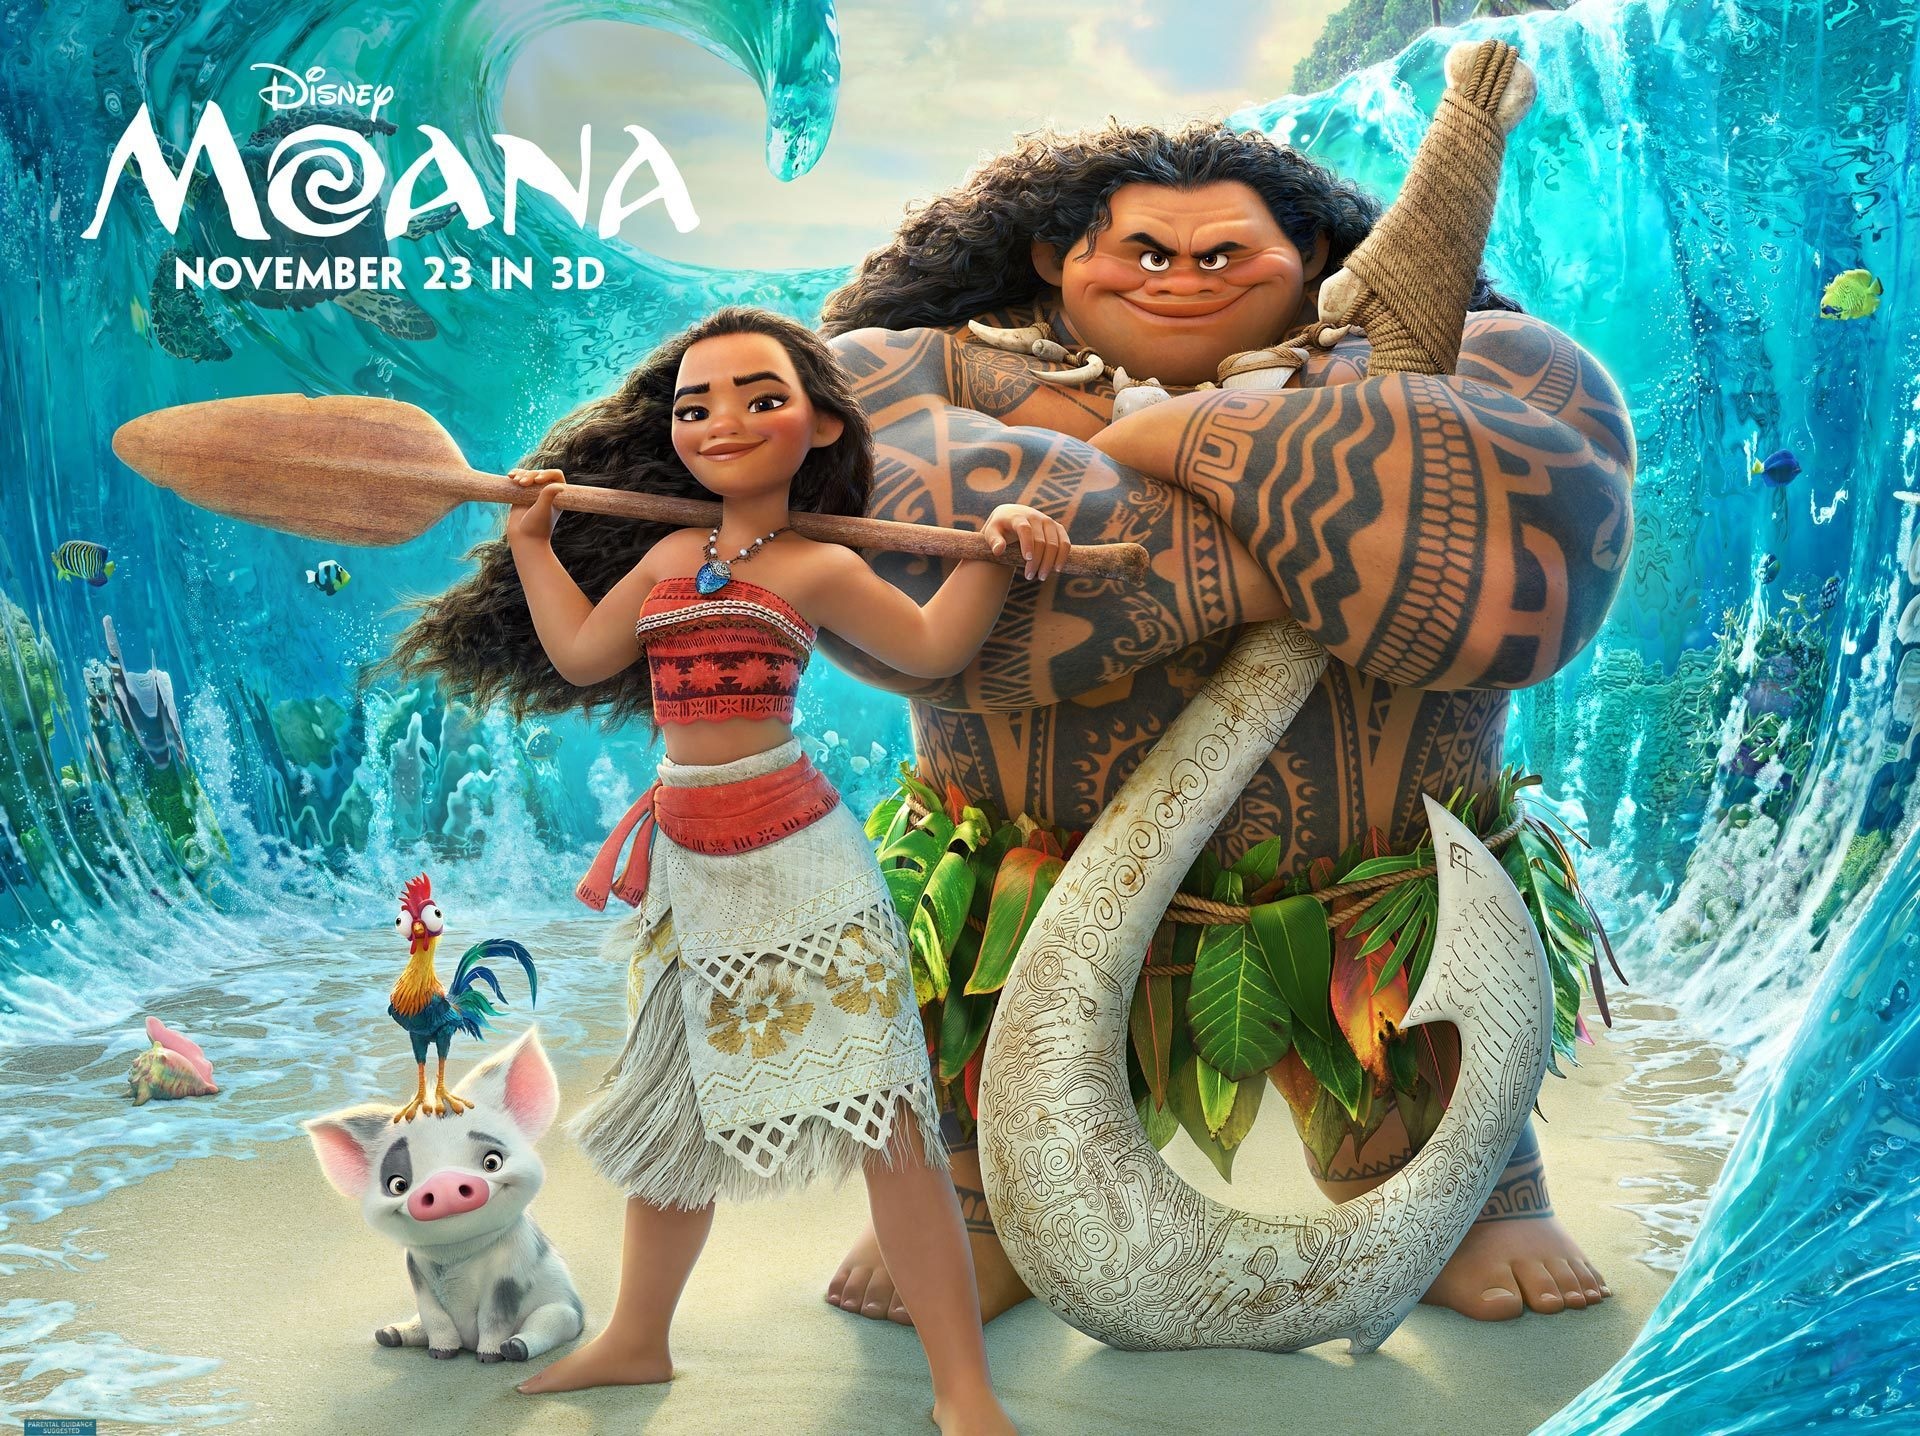 Venture behind the scenes with “The Way To Moana”